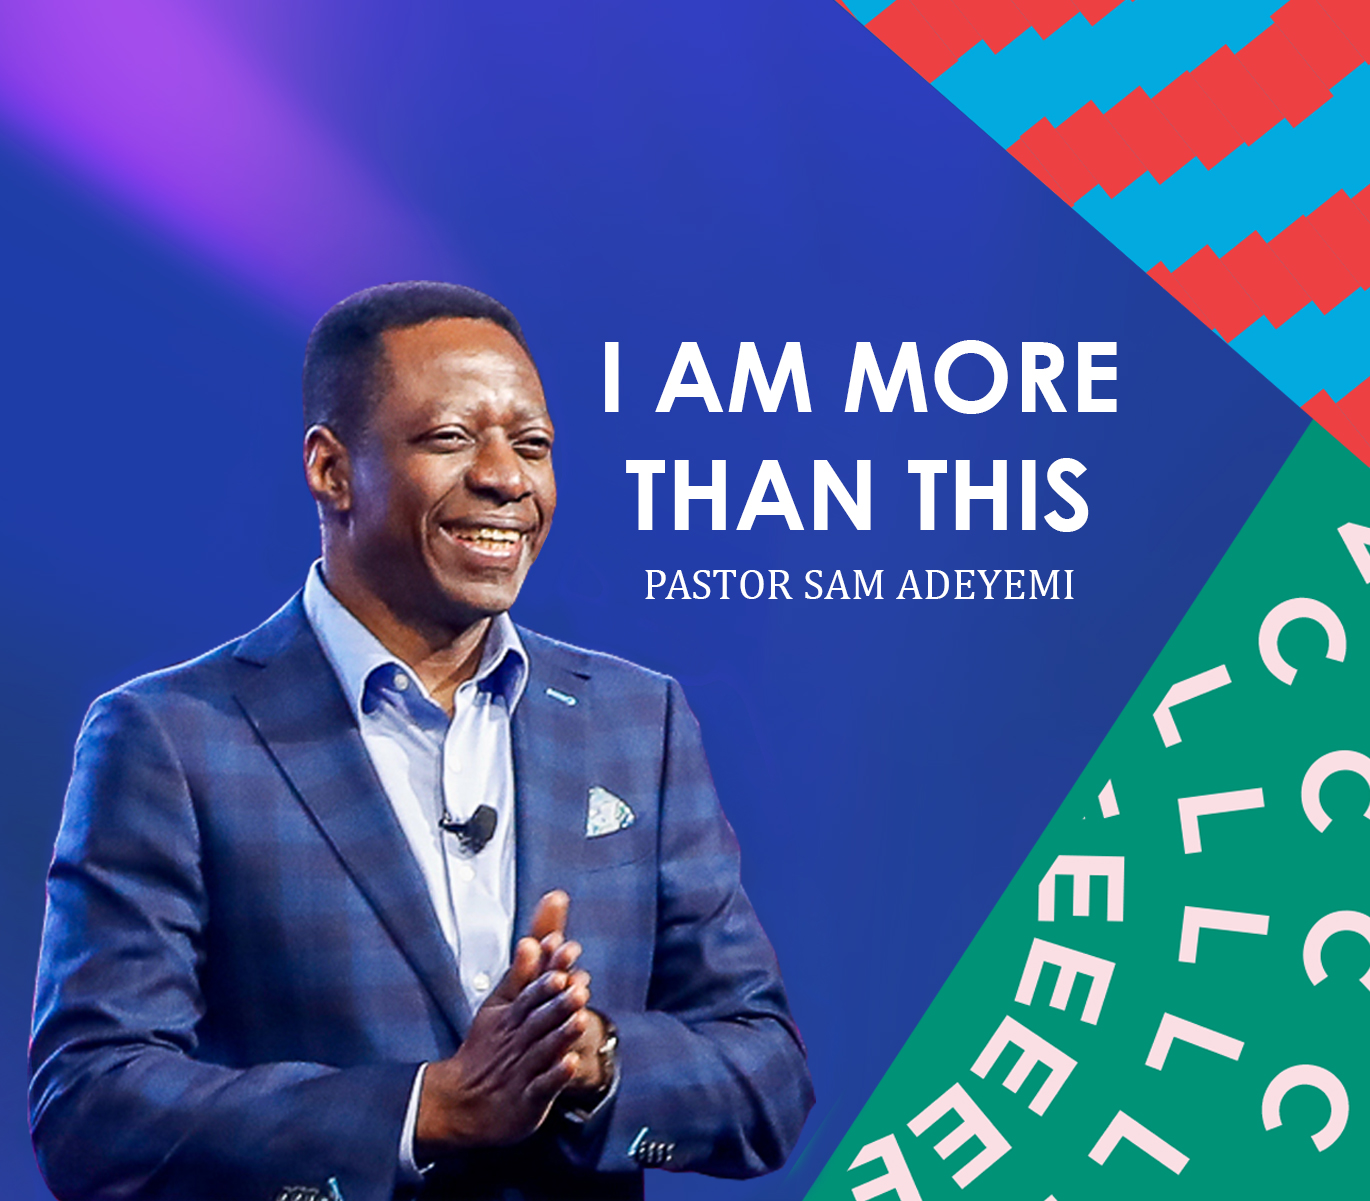 I Am More Than This by Pastor Sam Adeyemi